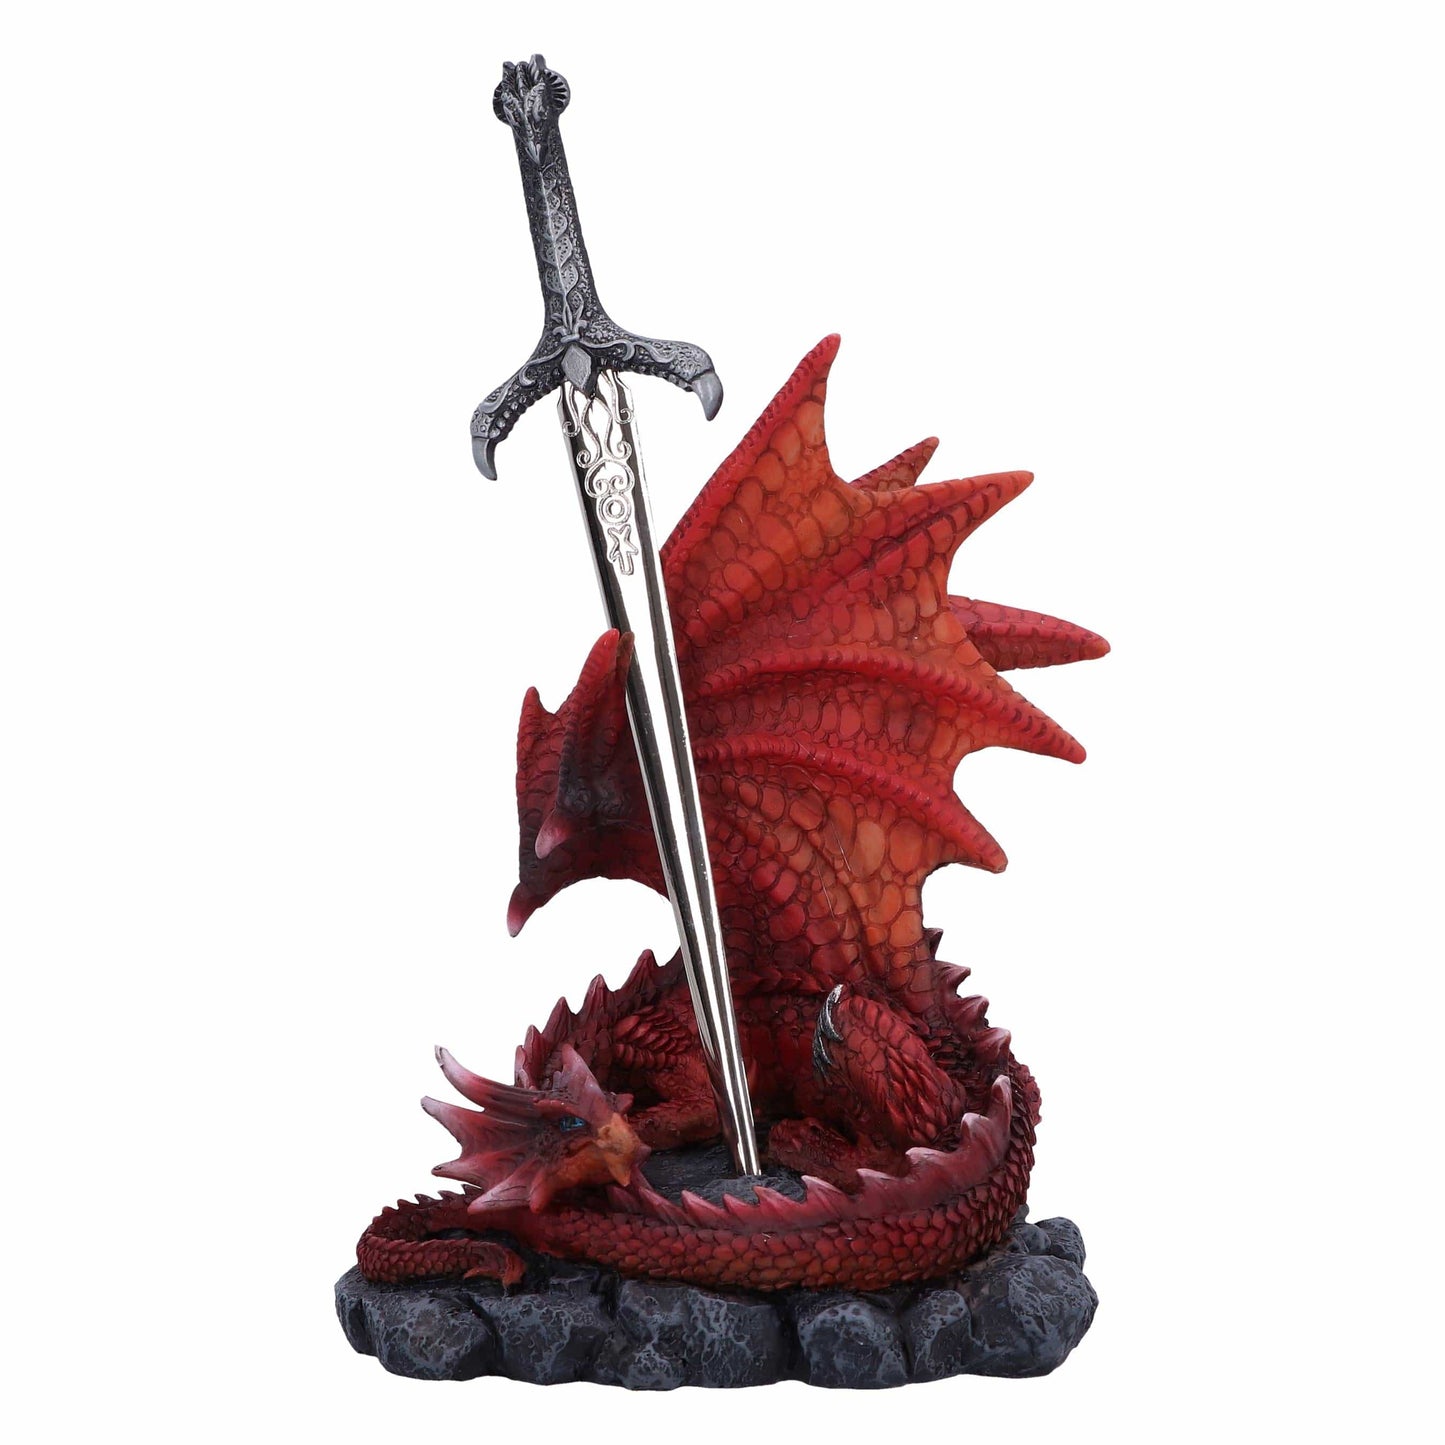 Forged in Flames dragon figurine